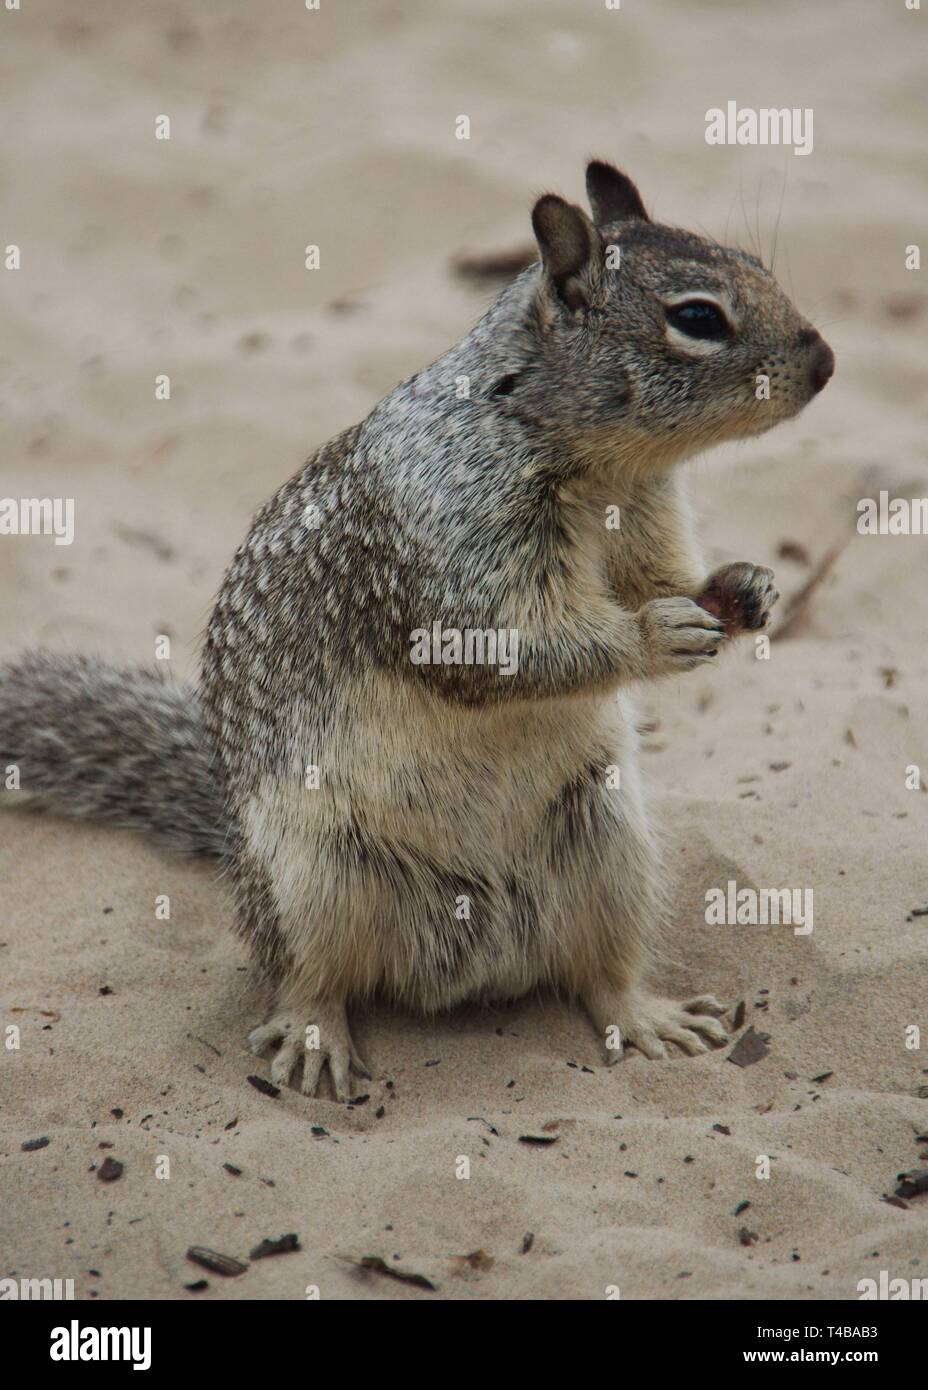 A close-up of a California Ground Squirrel (Otospermophilus beecheyi), also called Beechey ground squirrel, on the sandy beach of Northern California. Stock Photo